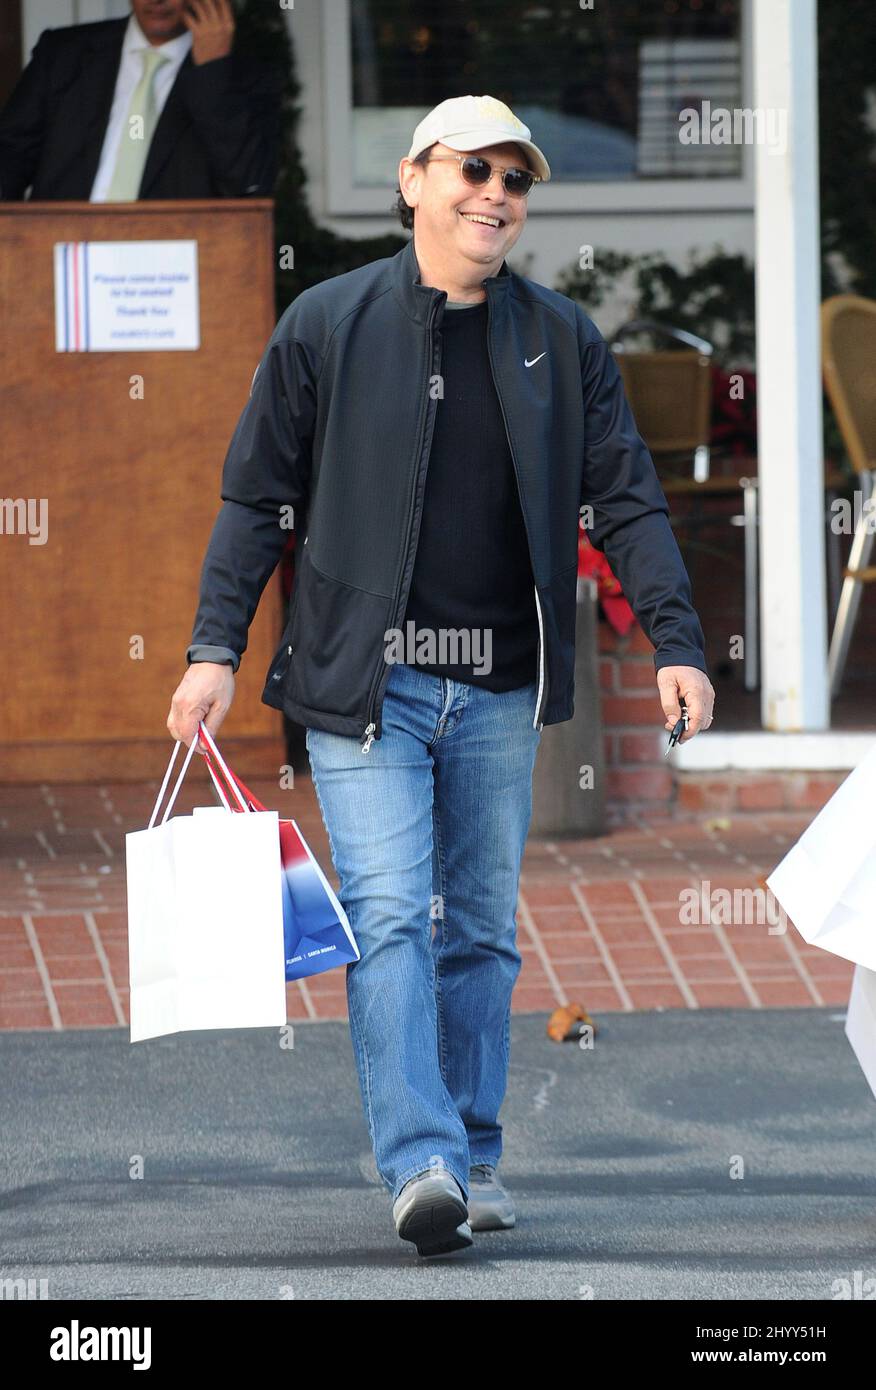 Billy Crystal Shopping in Fred Segal, Los Angeles. Stockfoto